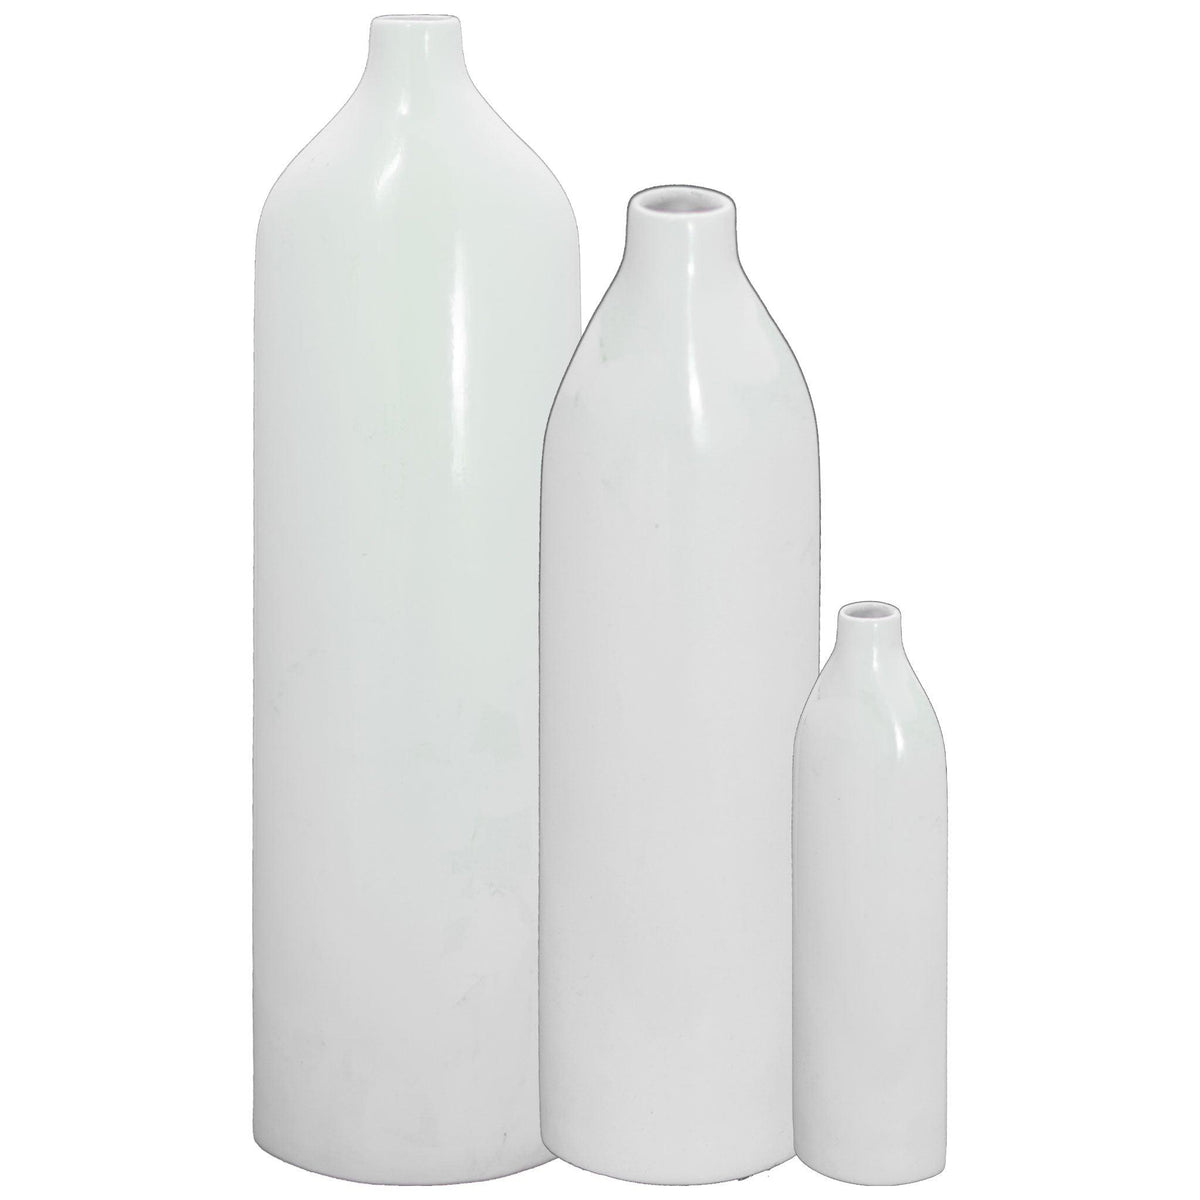 Lee Display's brand new Zen Style Ceramic Vase Shape sold in high gloss white on sale at leedisplay.com